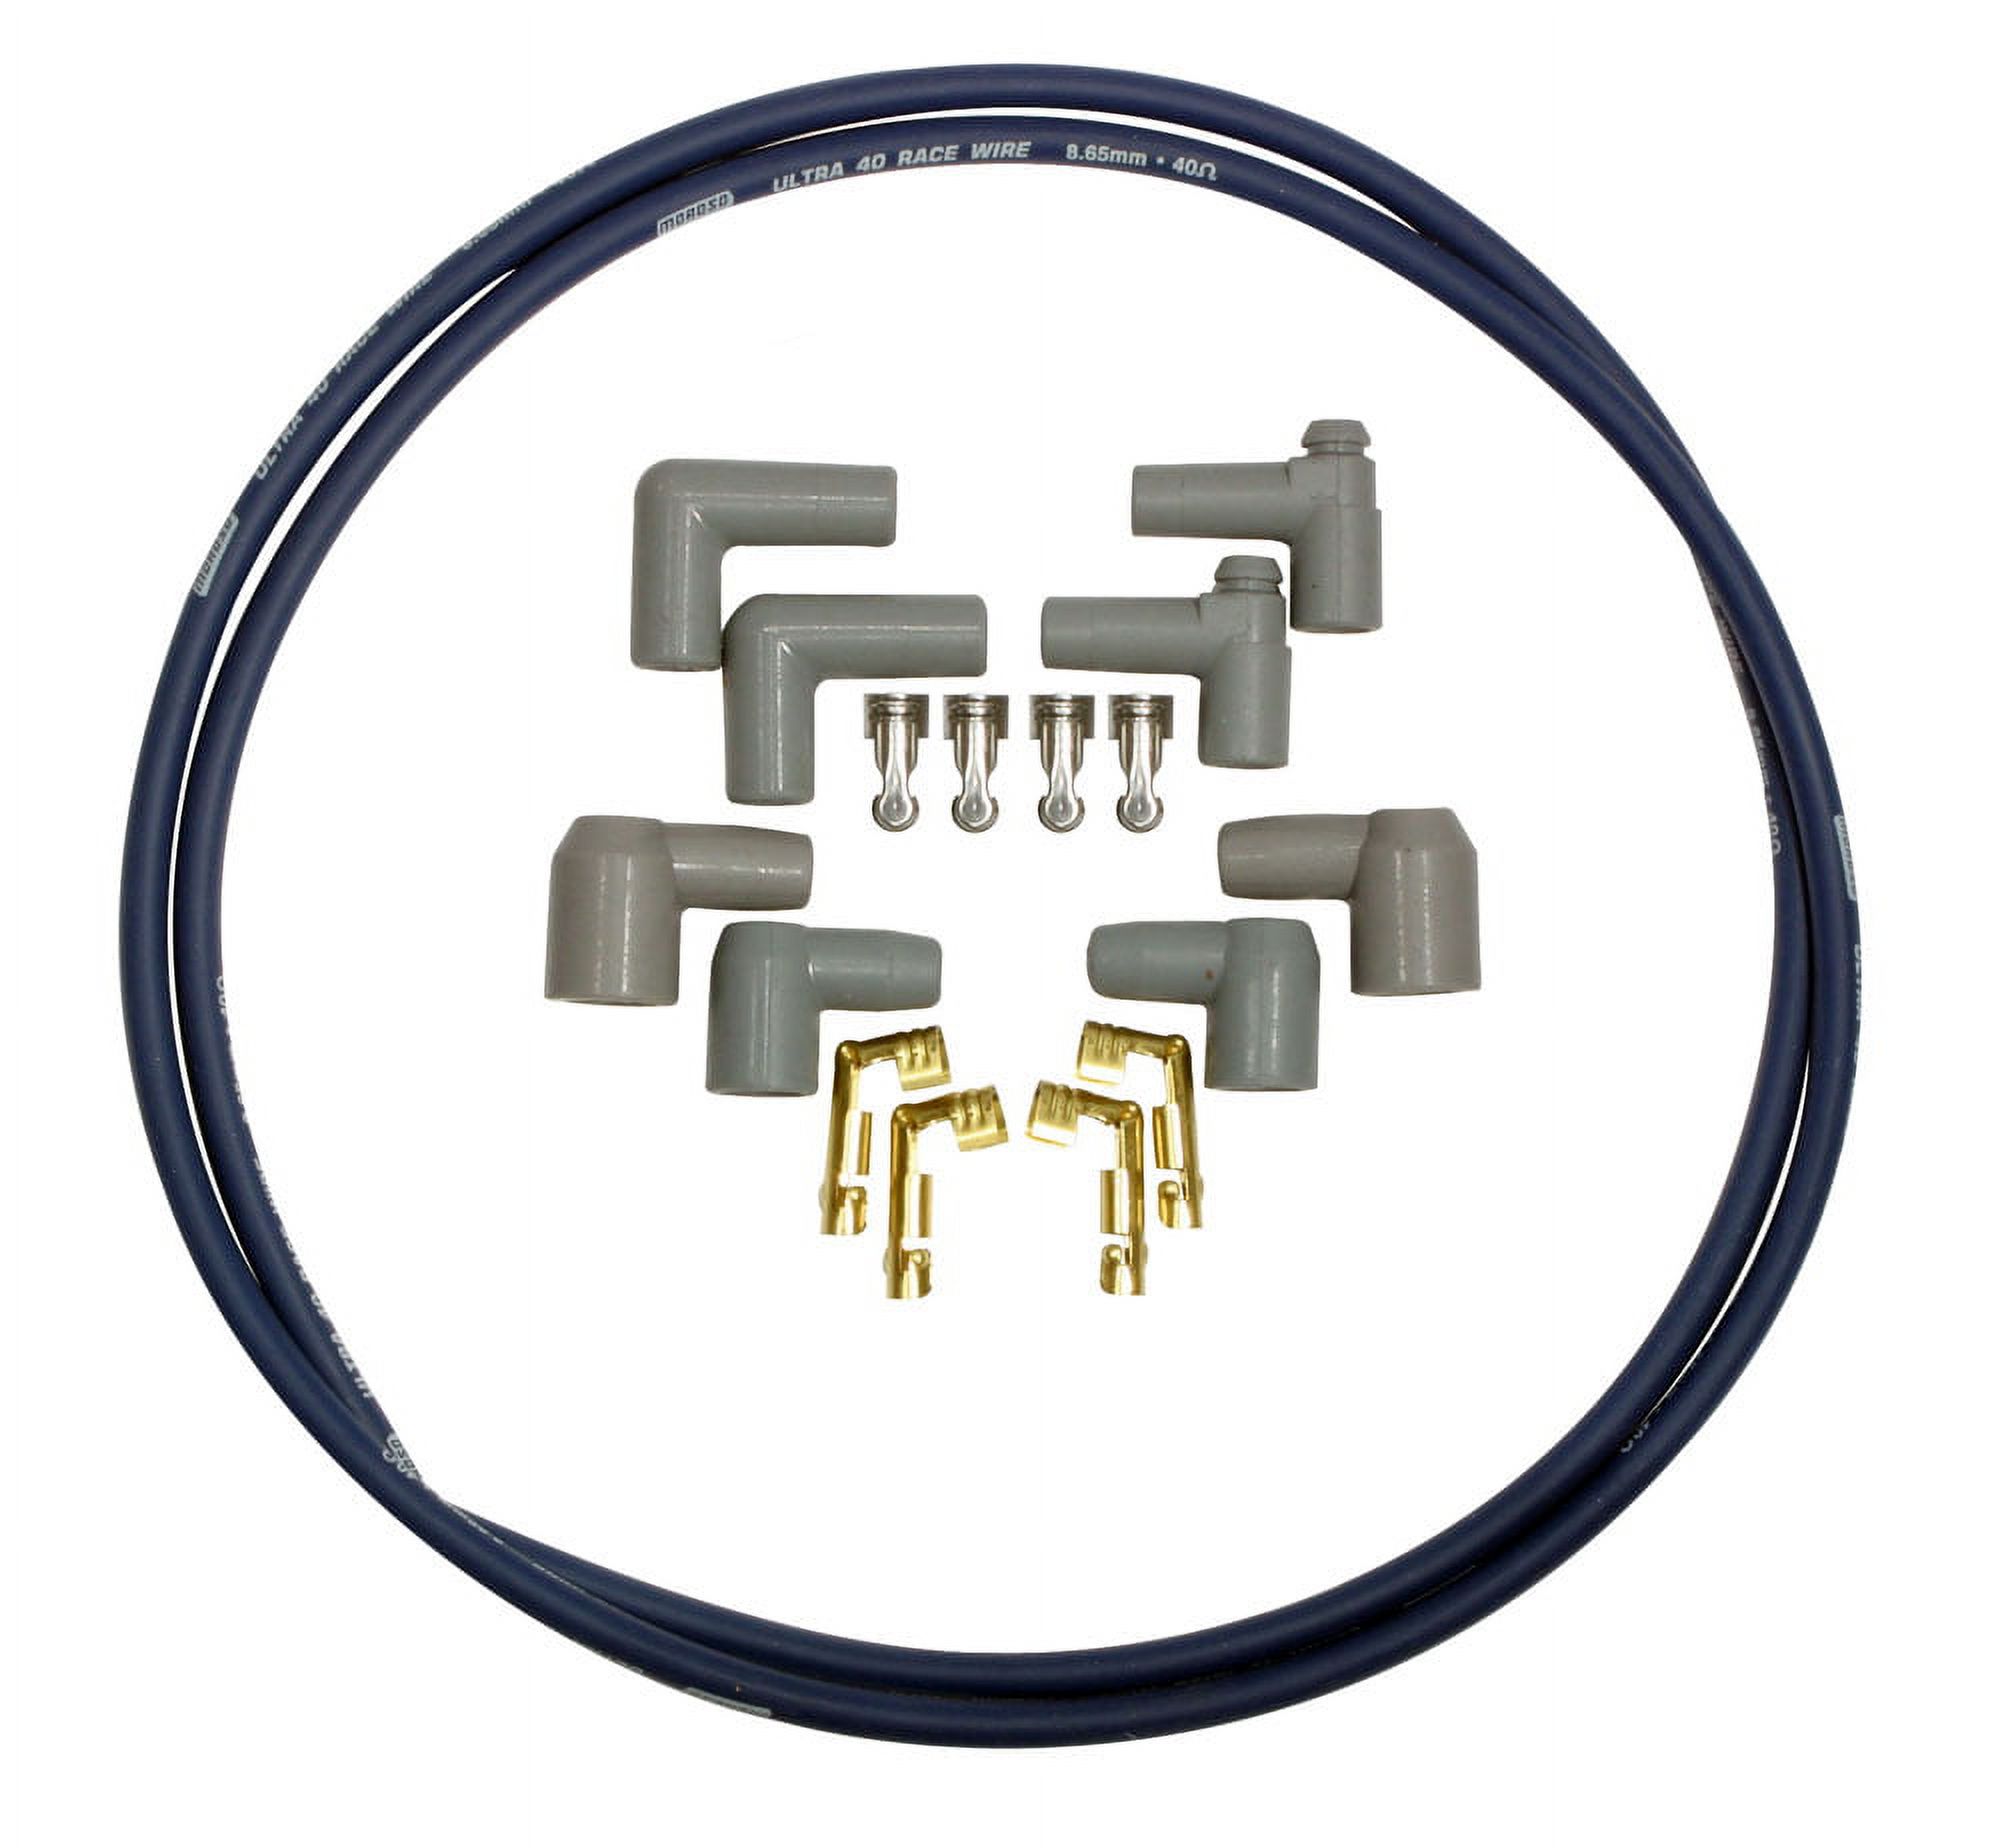 MOROSO 73237 Ignition Coil Wire 72 In. - image 1 of 2